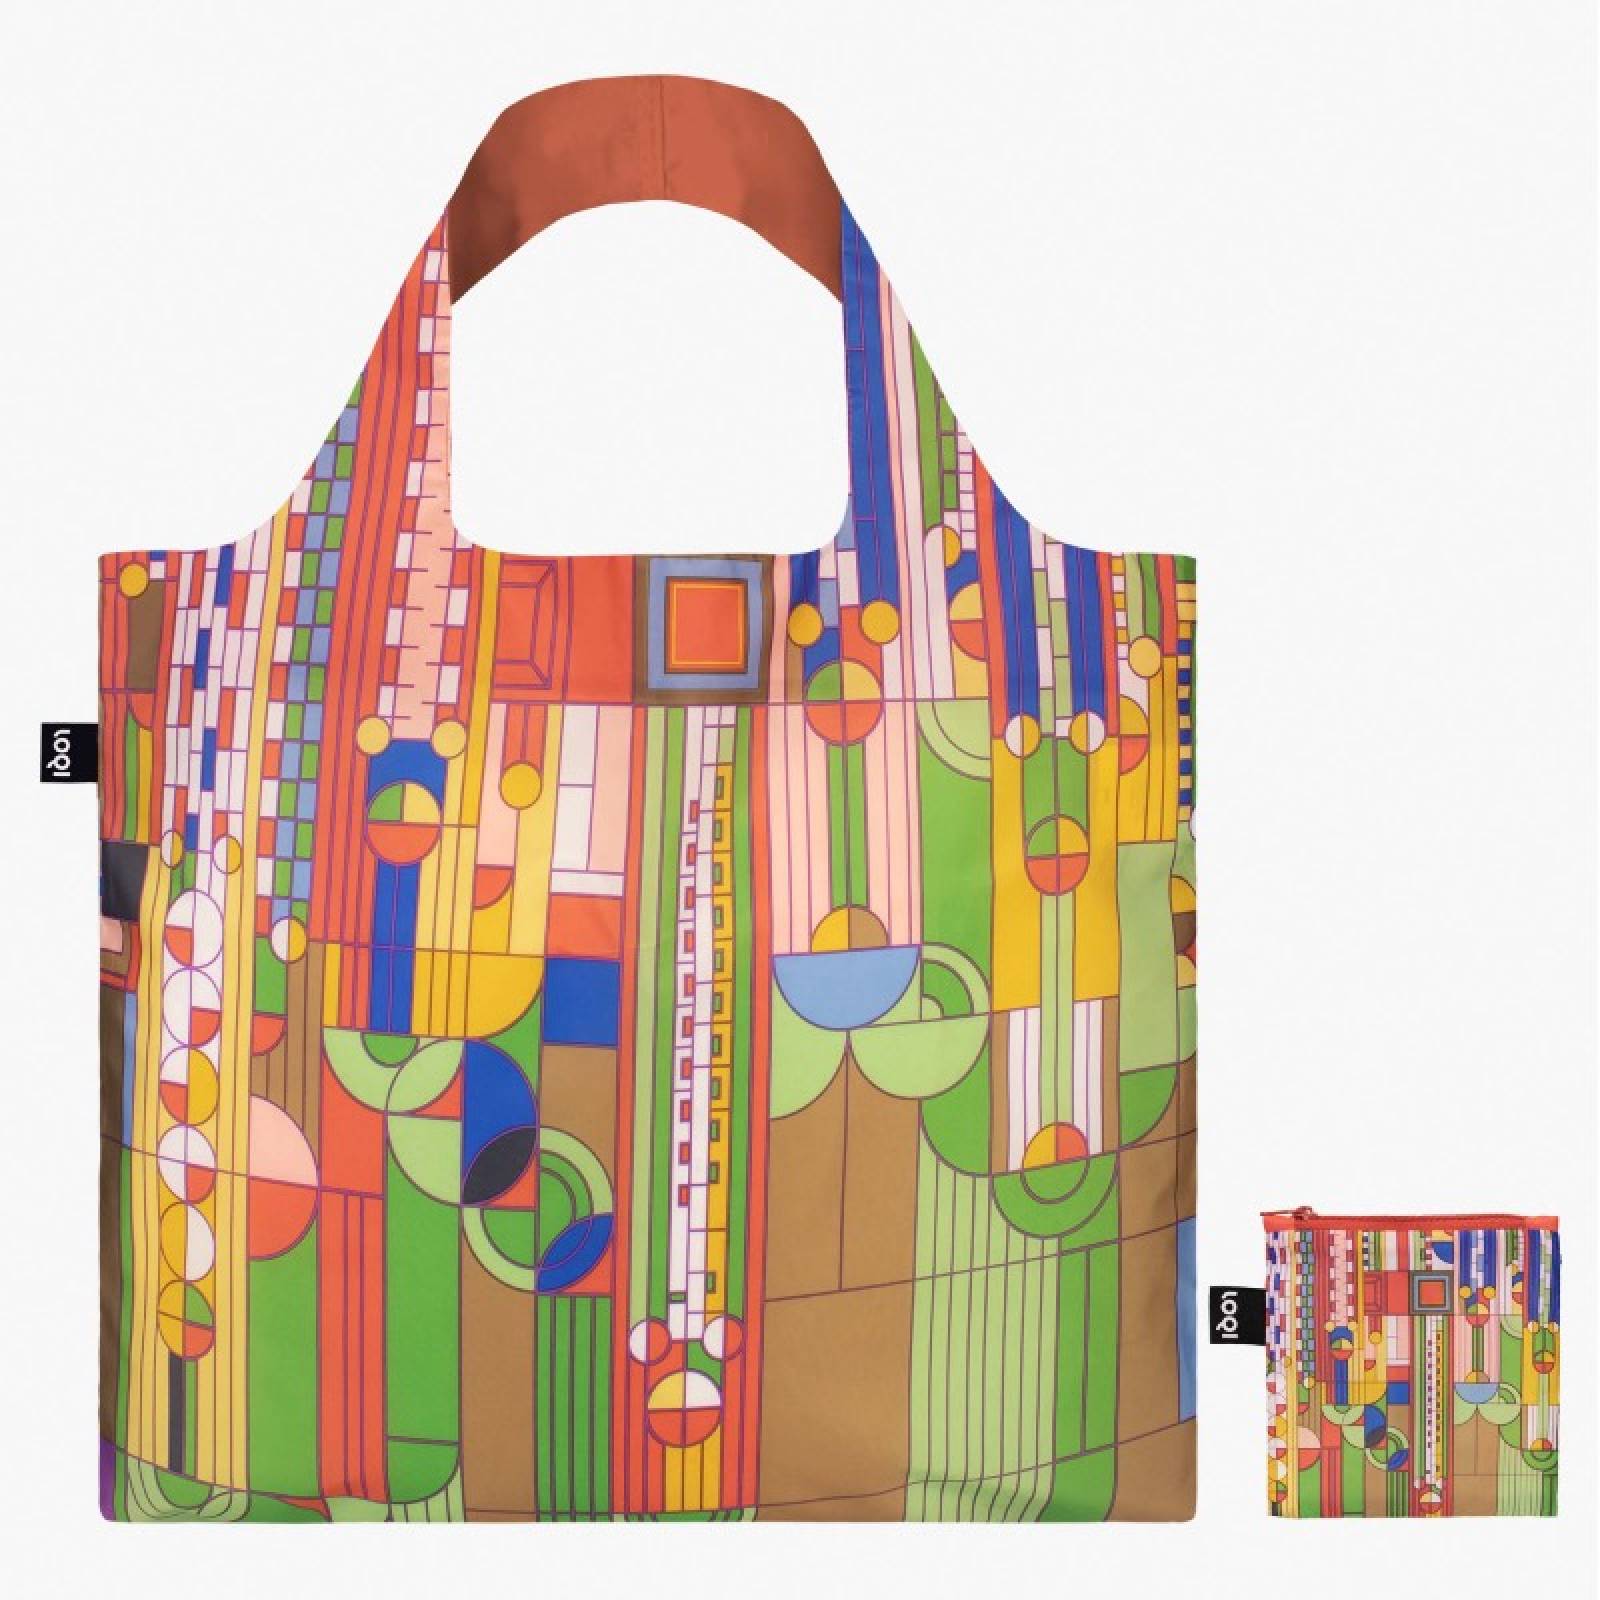 Frank Lloyd Wright Saguaro Forms - Eco Tote Bag With Pouch thumbnails